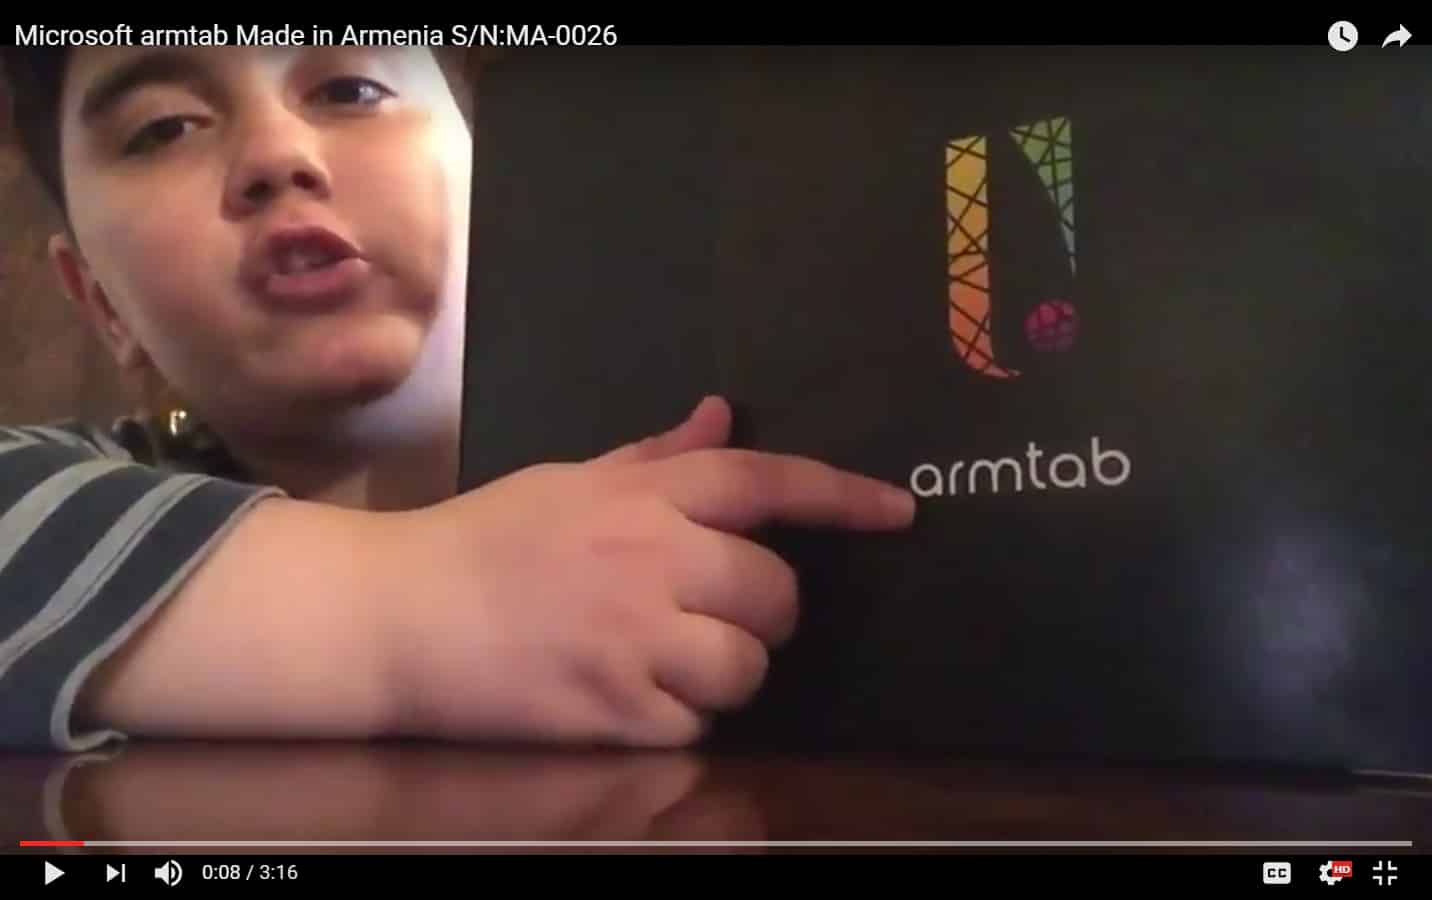 Unboxing Microsoft Armtab Made in Armenia Model MA-0026